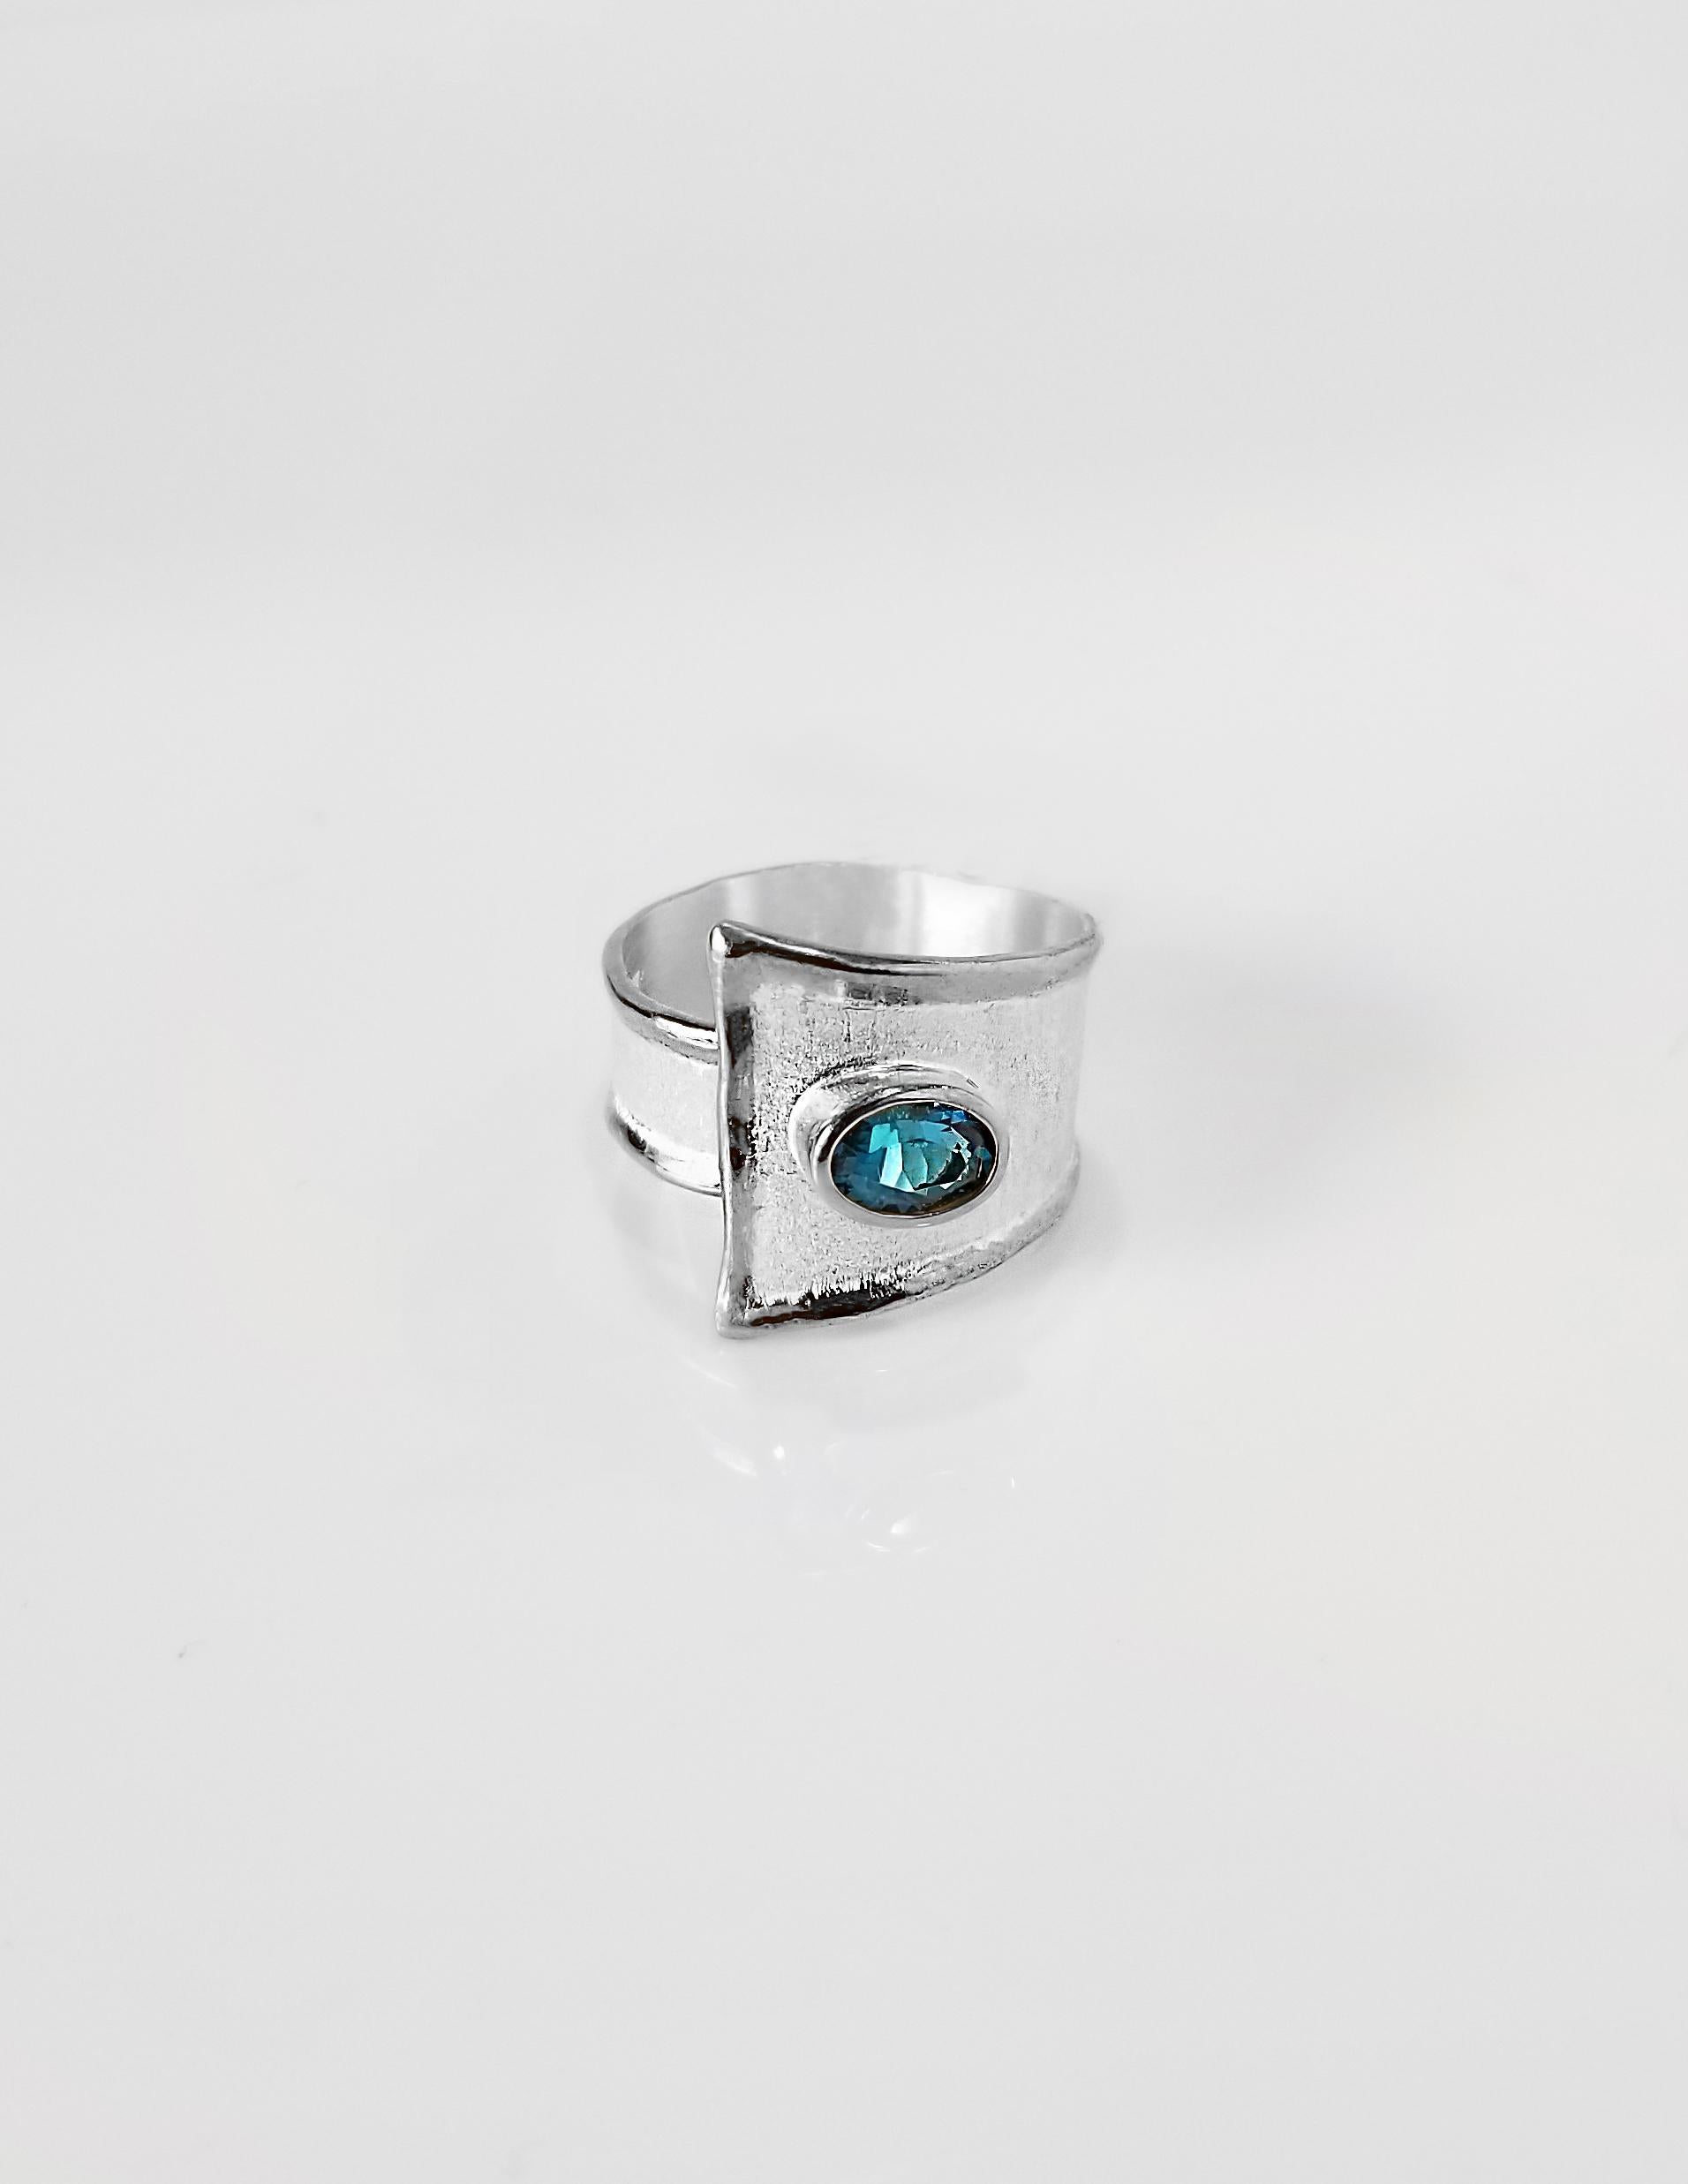 Yianni Creations Ammos Collection 100% Handmade Artisan Ring from Fine Silver featuring 1.60 Carat London Blue Topaz complemented by unique techniques of craftsmanship - brushed texture and nature-inspired liquid edges. The core of this beautiful